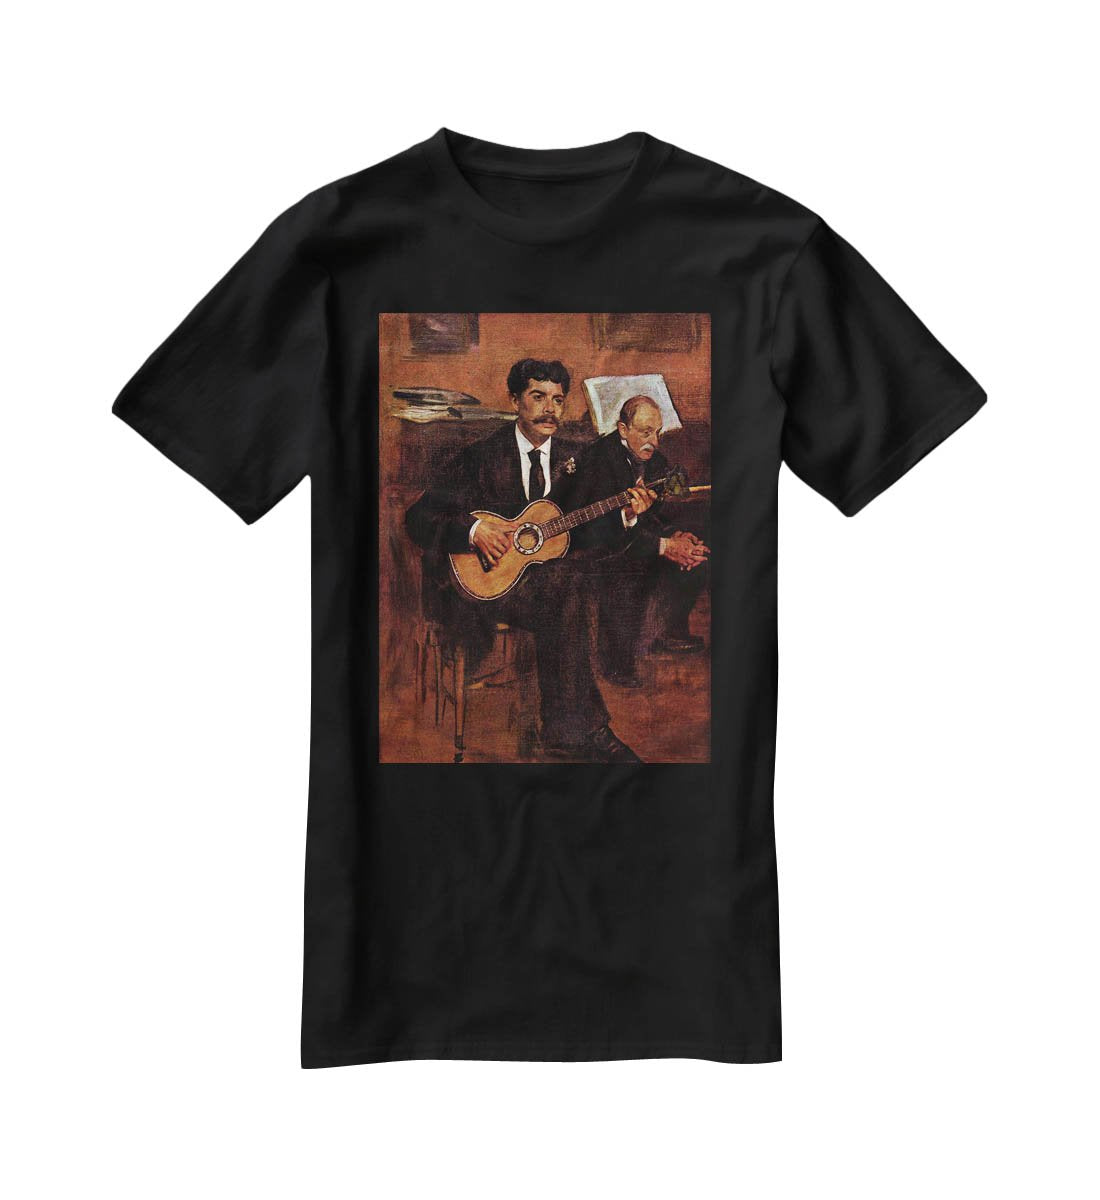 The guitarist Pagans and Monsieur Degas by Manet T-Shirt - Canvas Art Rocks - 1